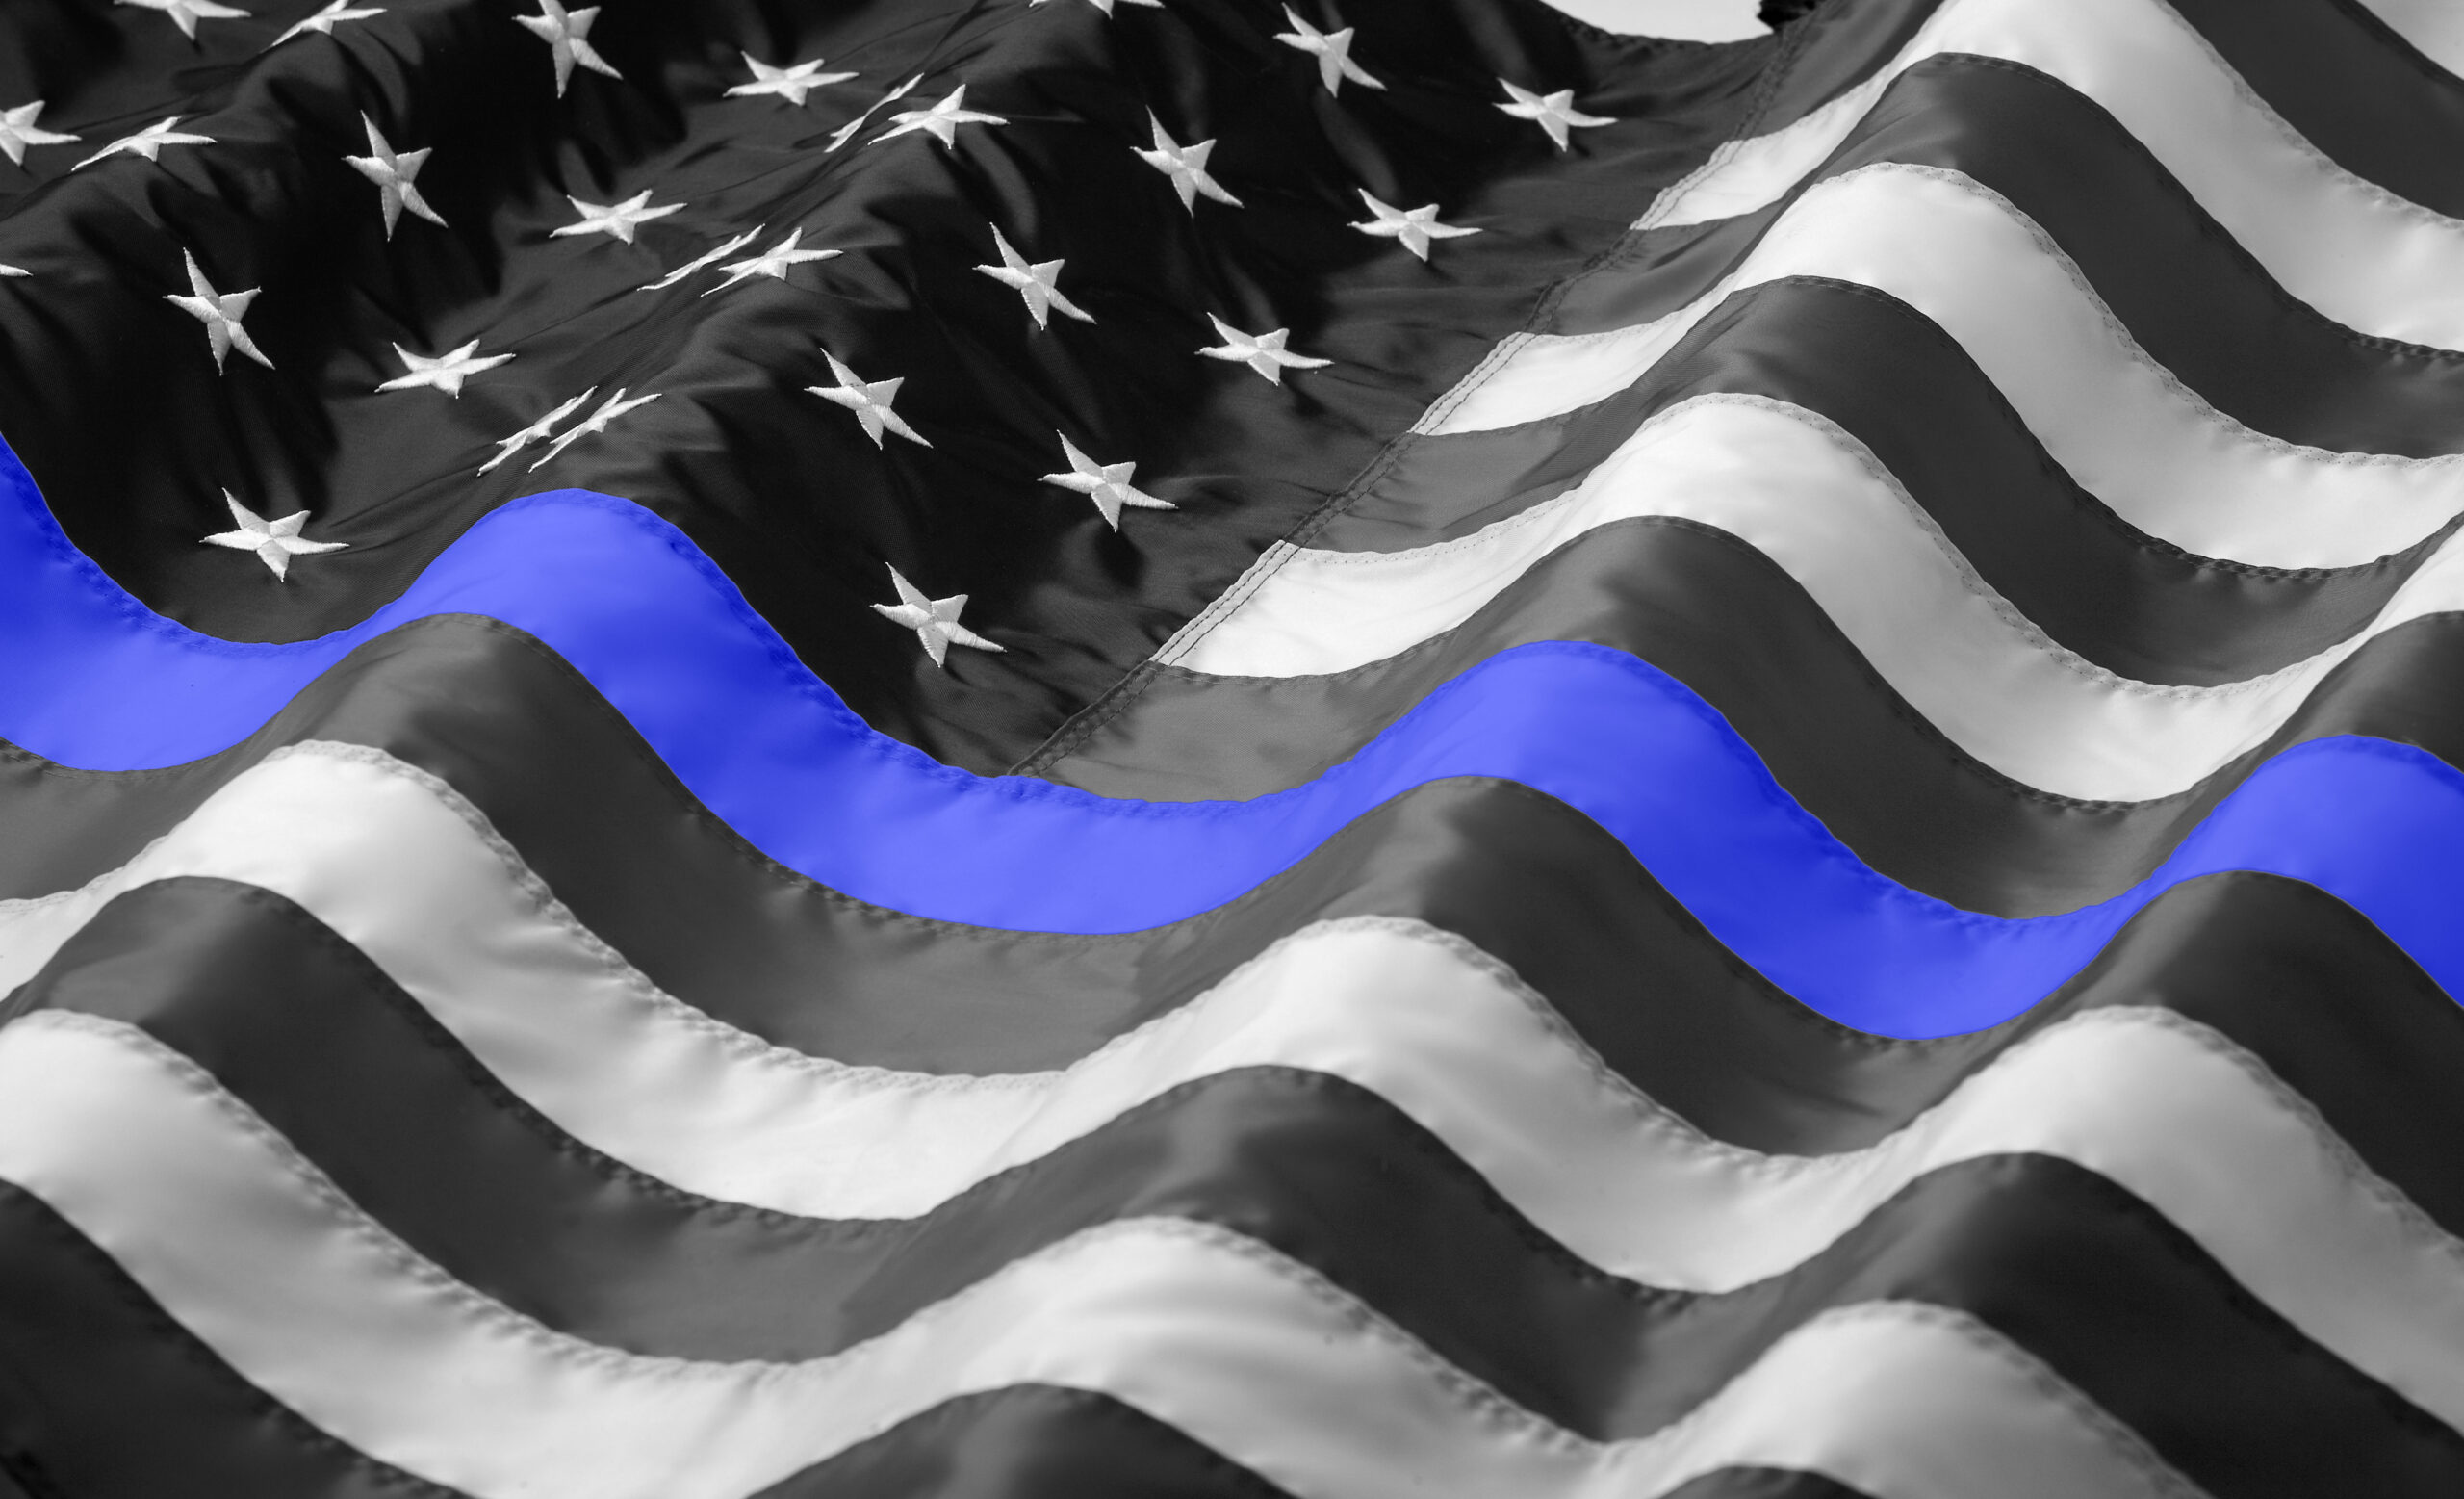 The thin Blue Line